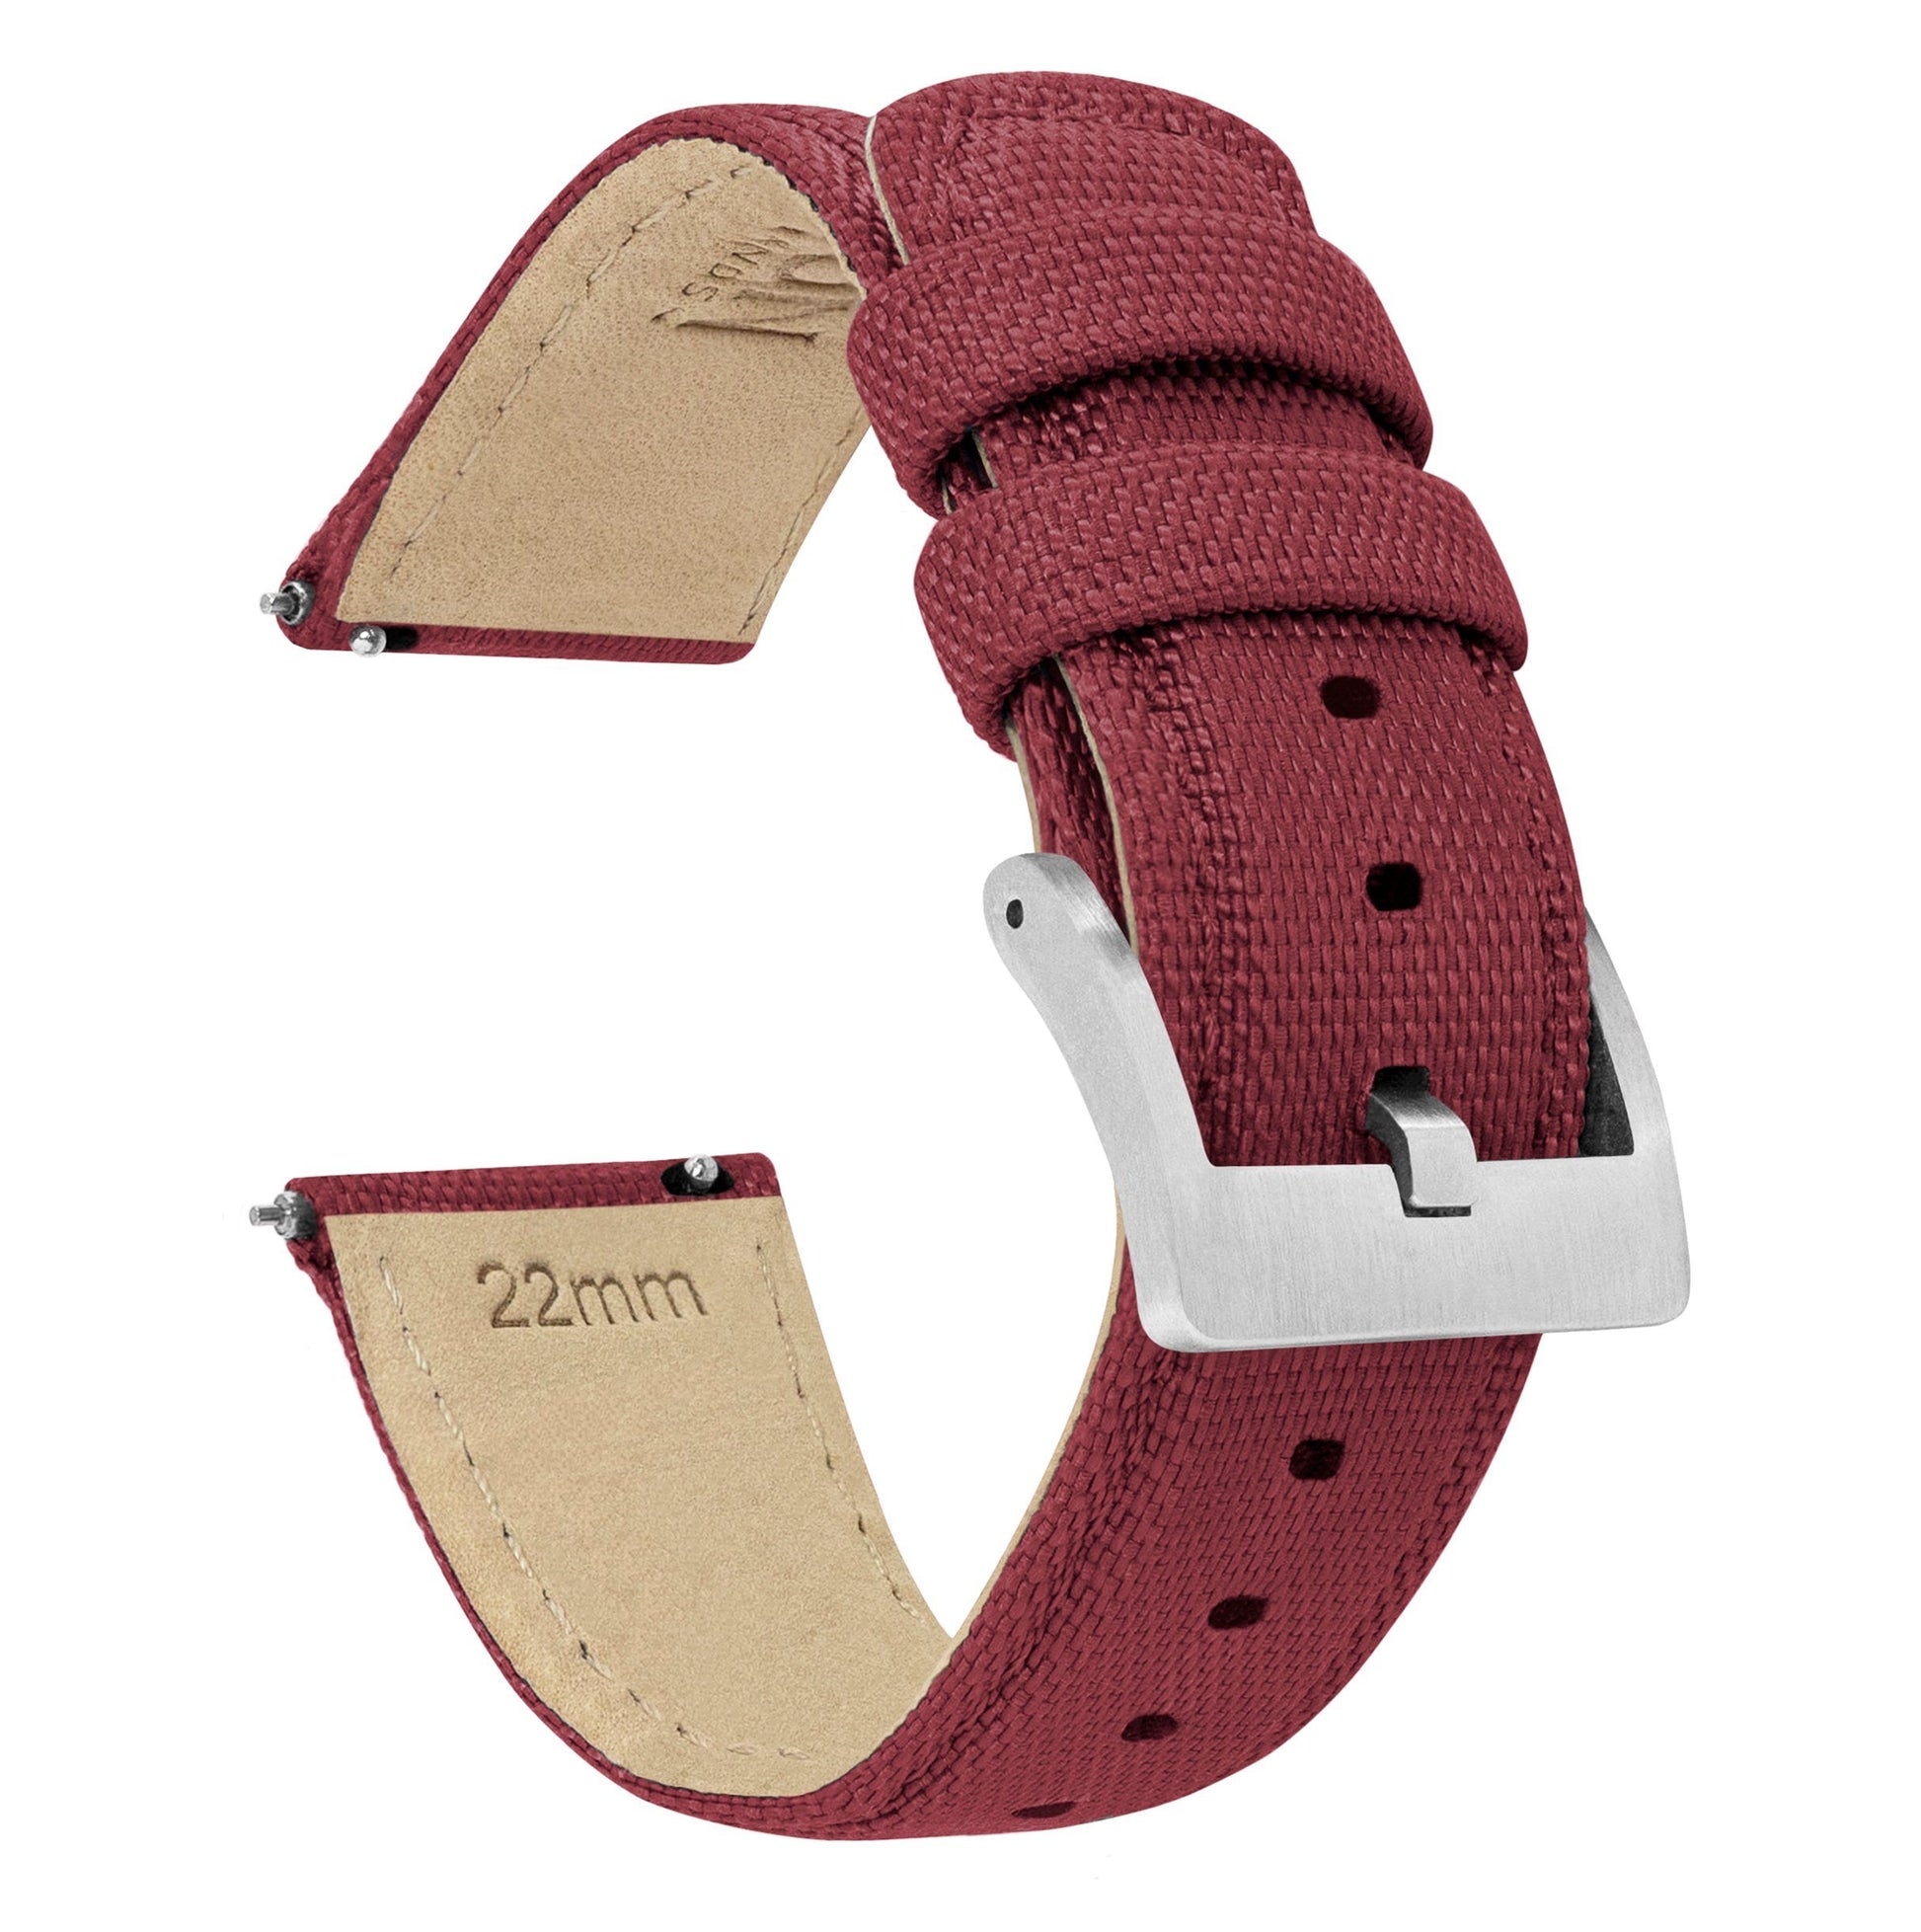 Fossil Q | Sailcloth Quick Release | Raspberry Red - Barton Watch Bands